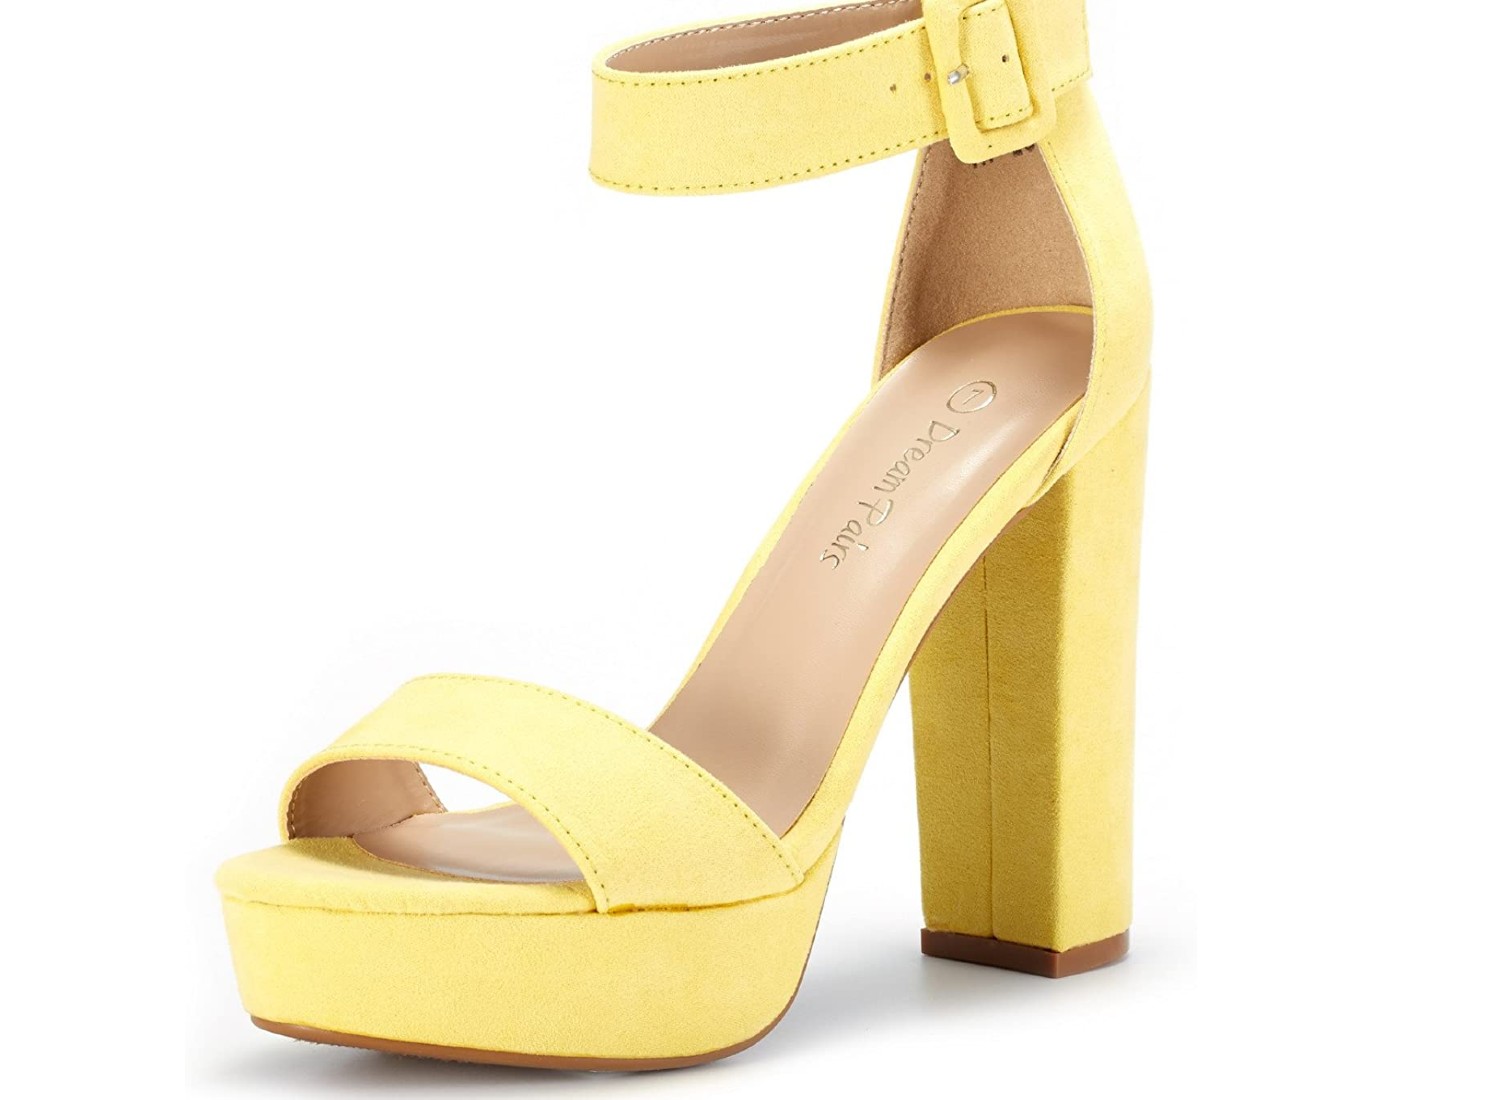 A single, yellow show with a chunky heel and ankle strap.